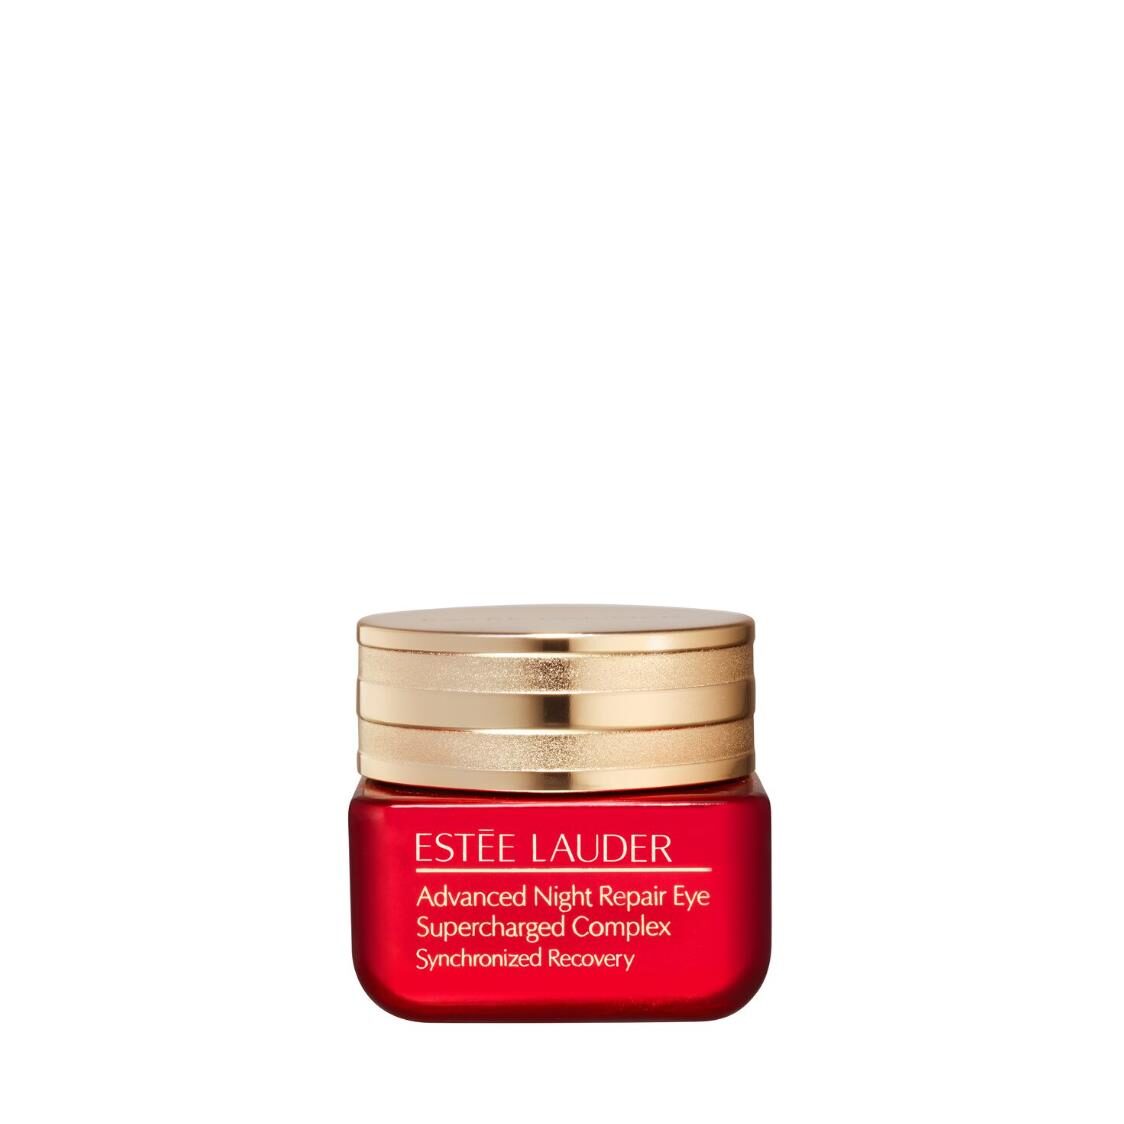 Este Lauder Advanced Night Repair Eye Supercharged Complex Synchronized Recovery in Red Jar - 15ml